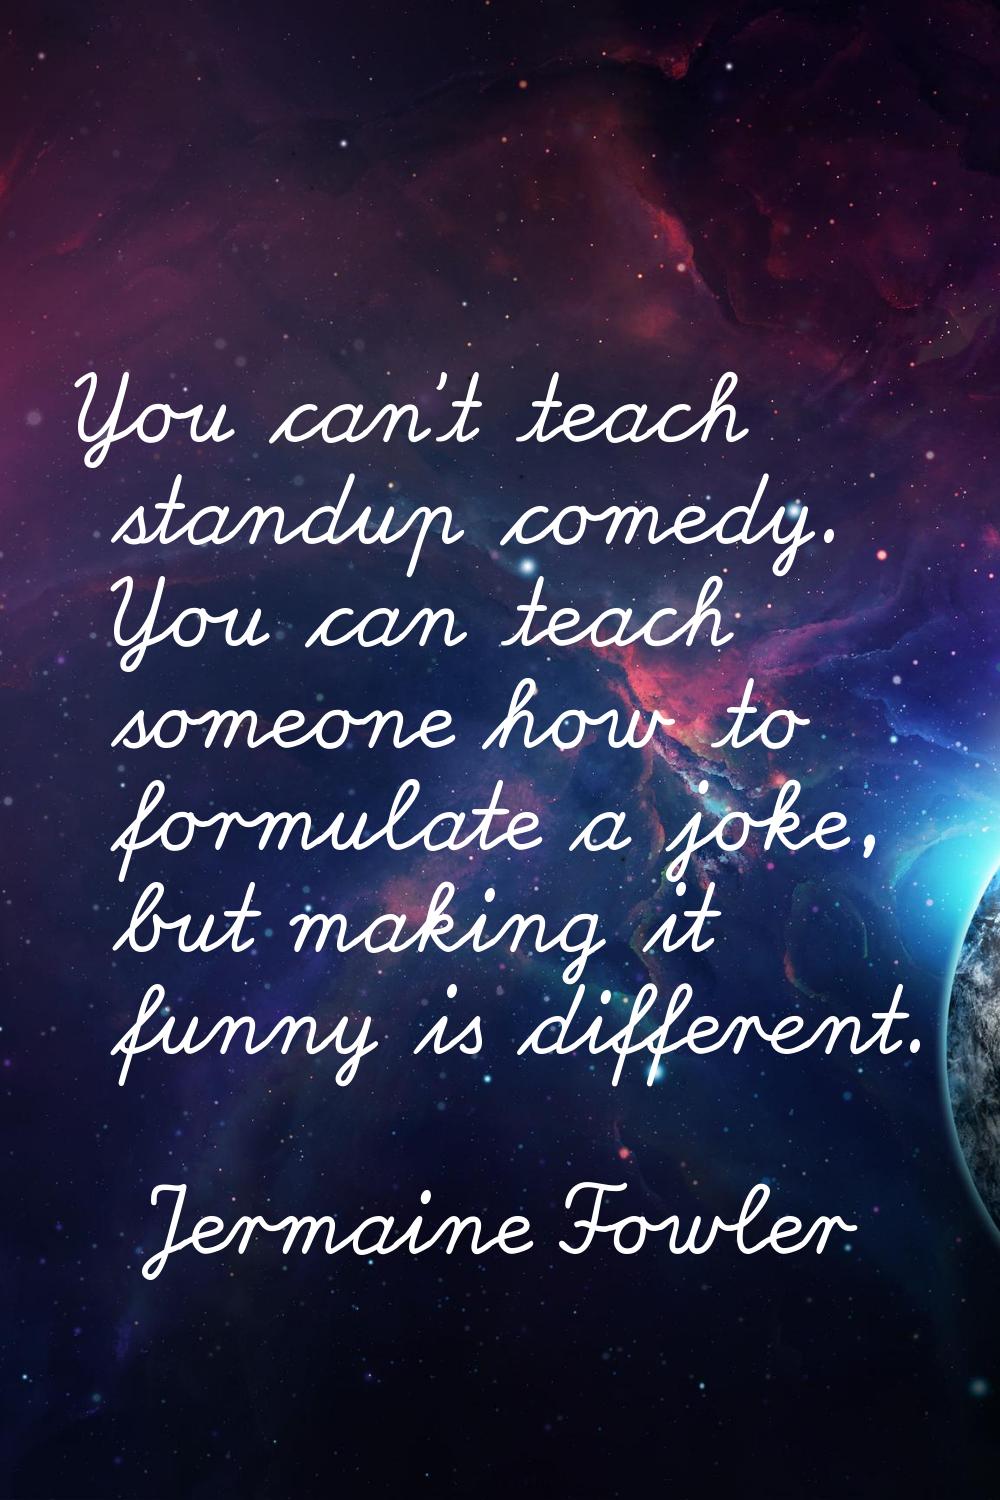 You can't teach standup comedy. You can teach someone how to formulate a joke, but making it funny 